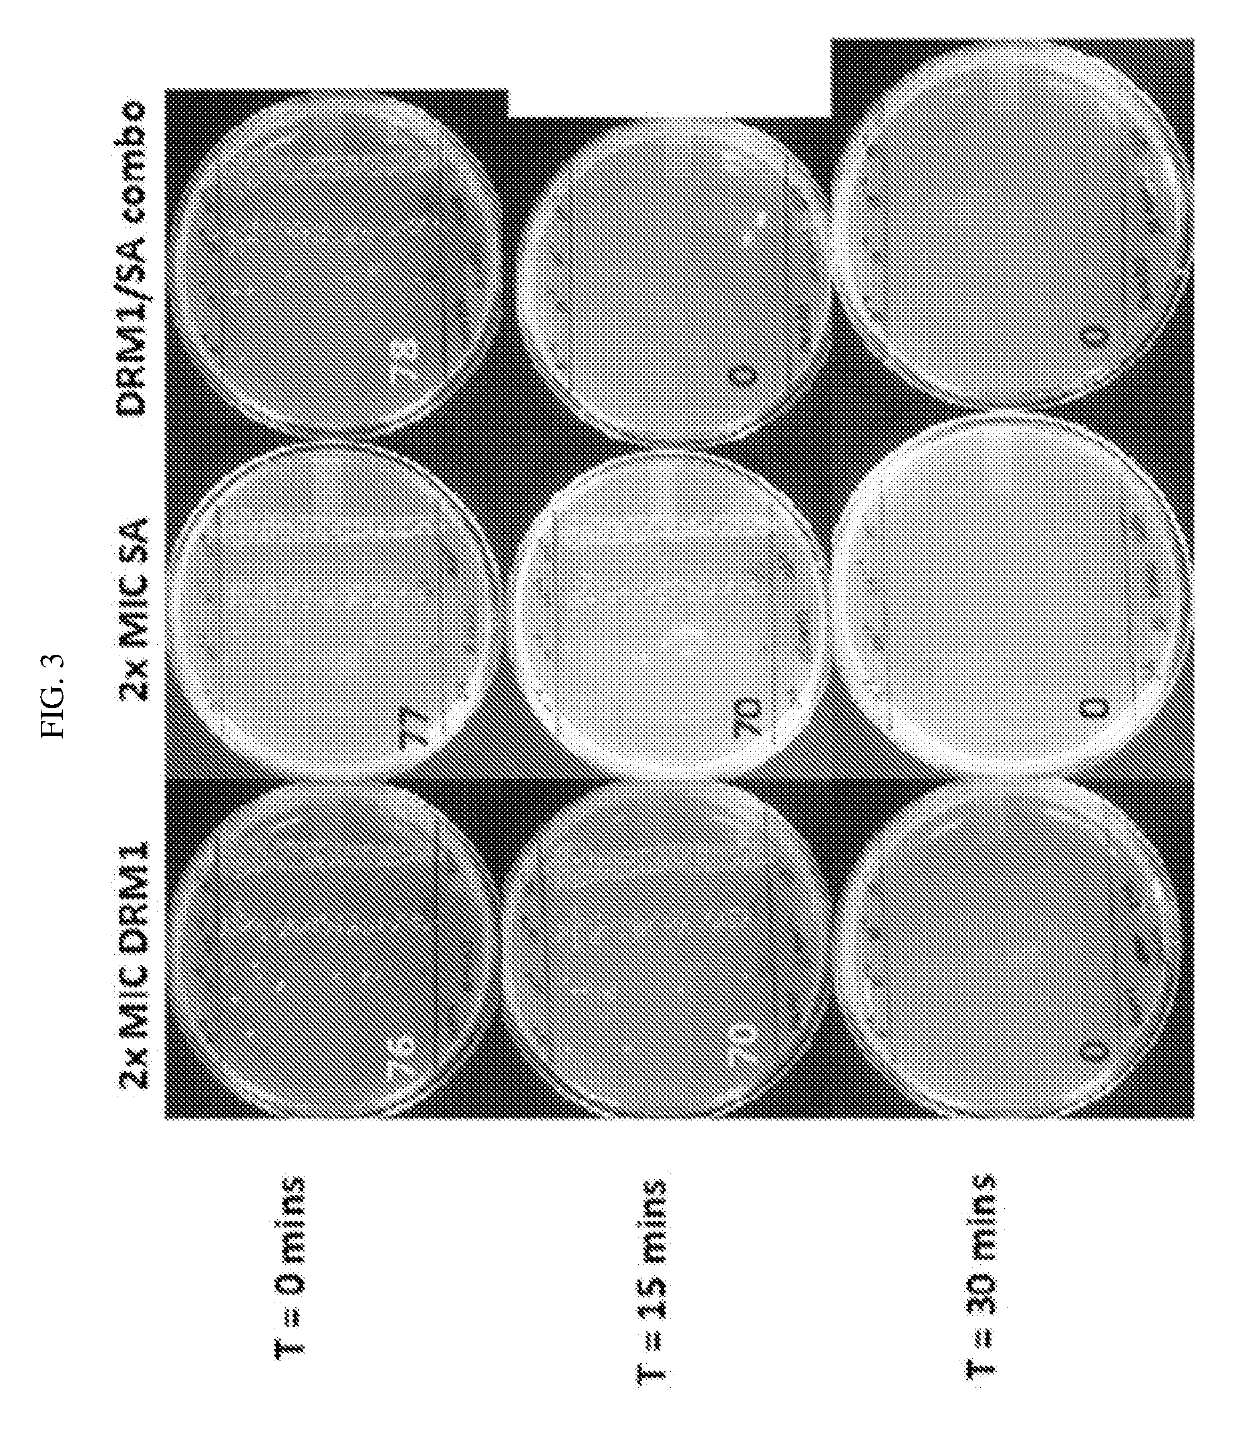 Compositions and methods for treating acne vulgaris